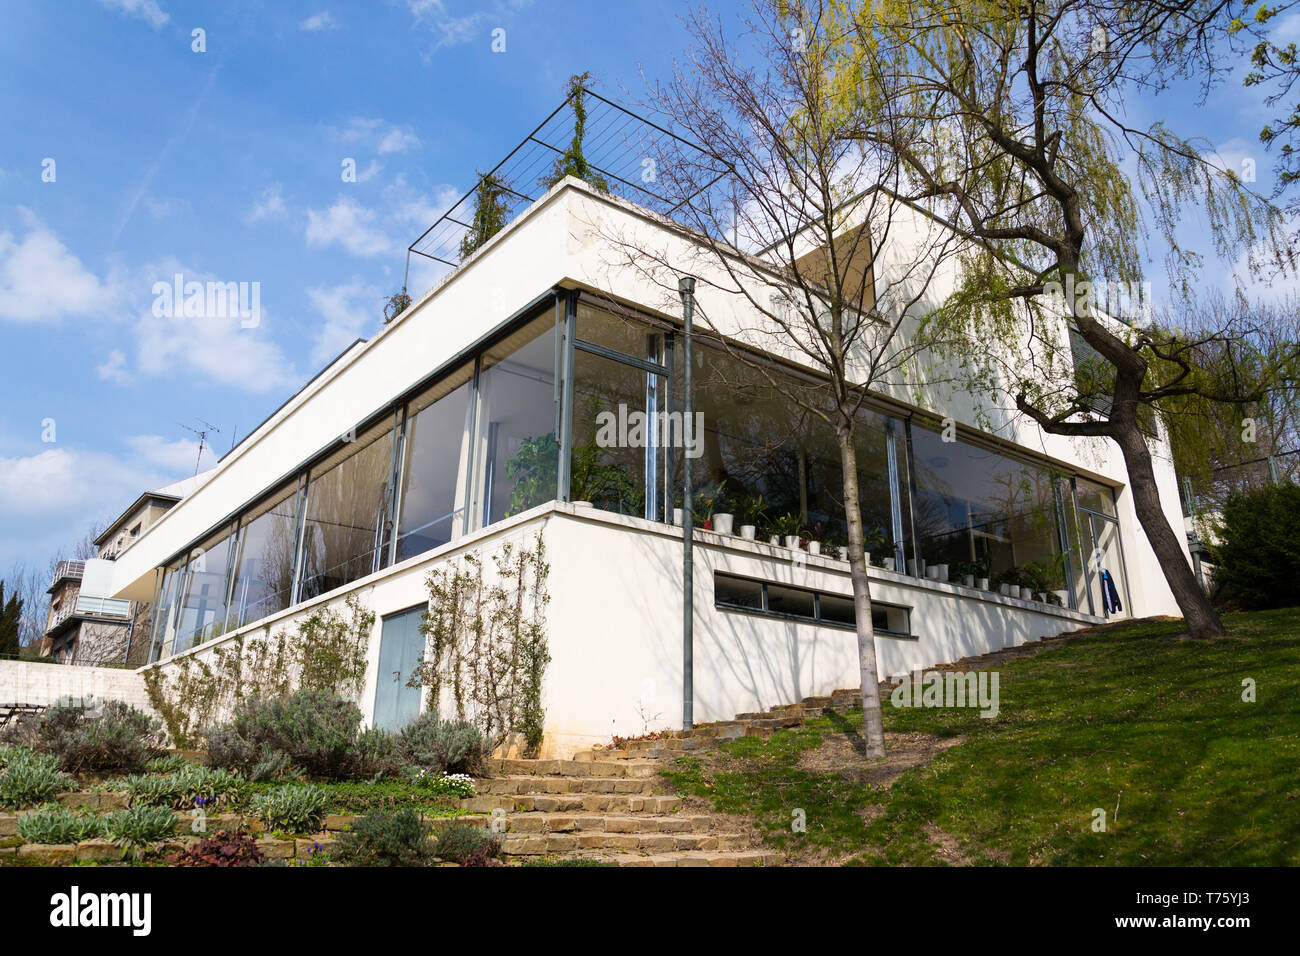 BRNO, CZECH REPUBLIC - APRIL 8 2019: Villa Tugendhat by architect Ludwig  Mies van der Rohe built in 1929-1930, modern functionalism architecture  Stock Photo - Alamy